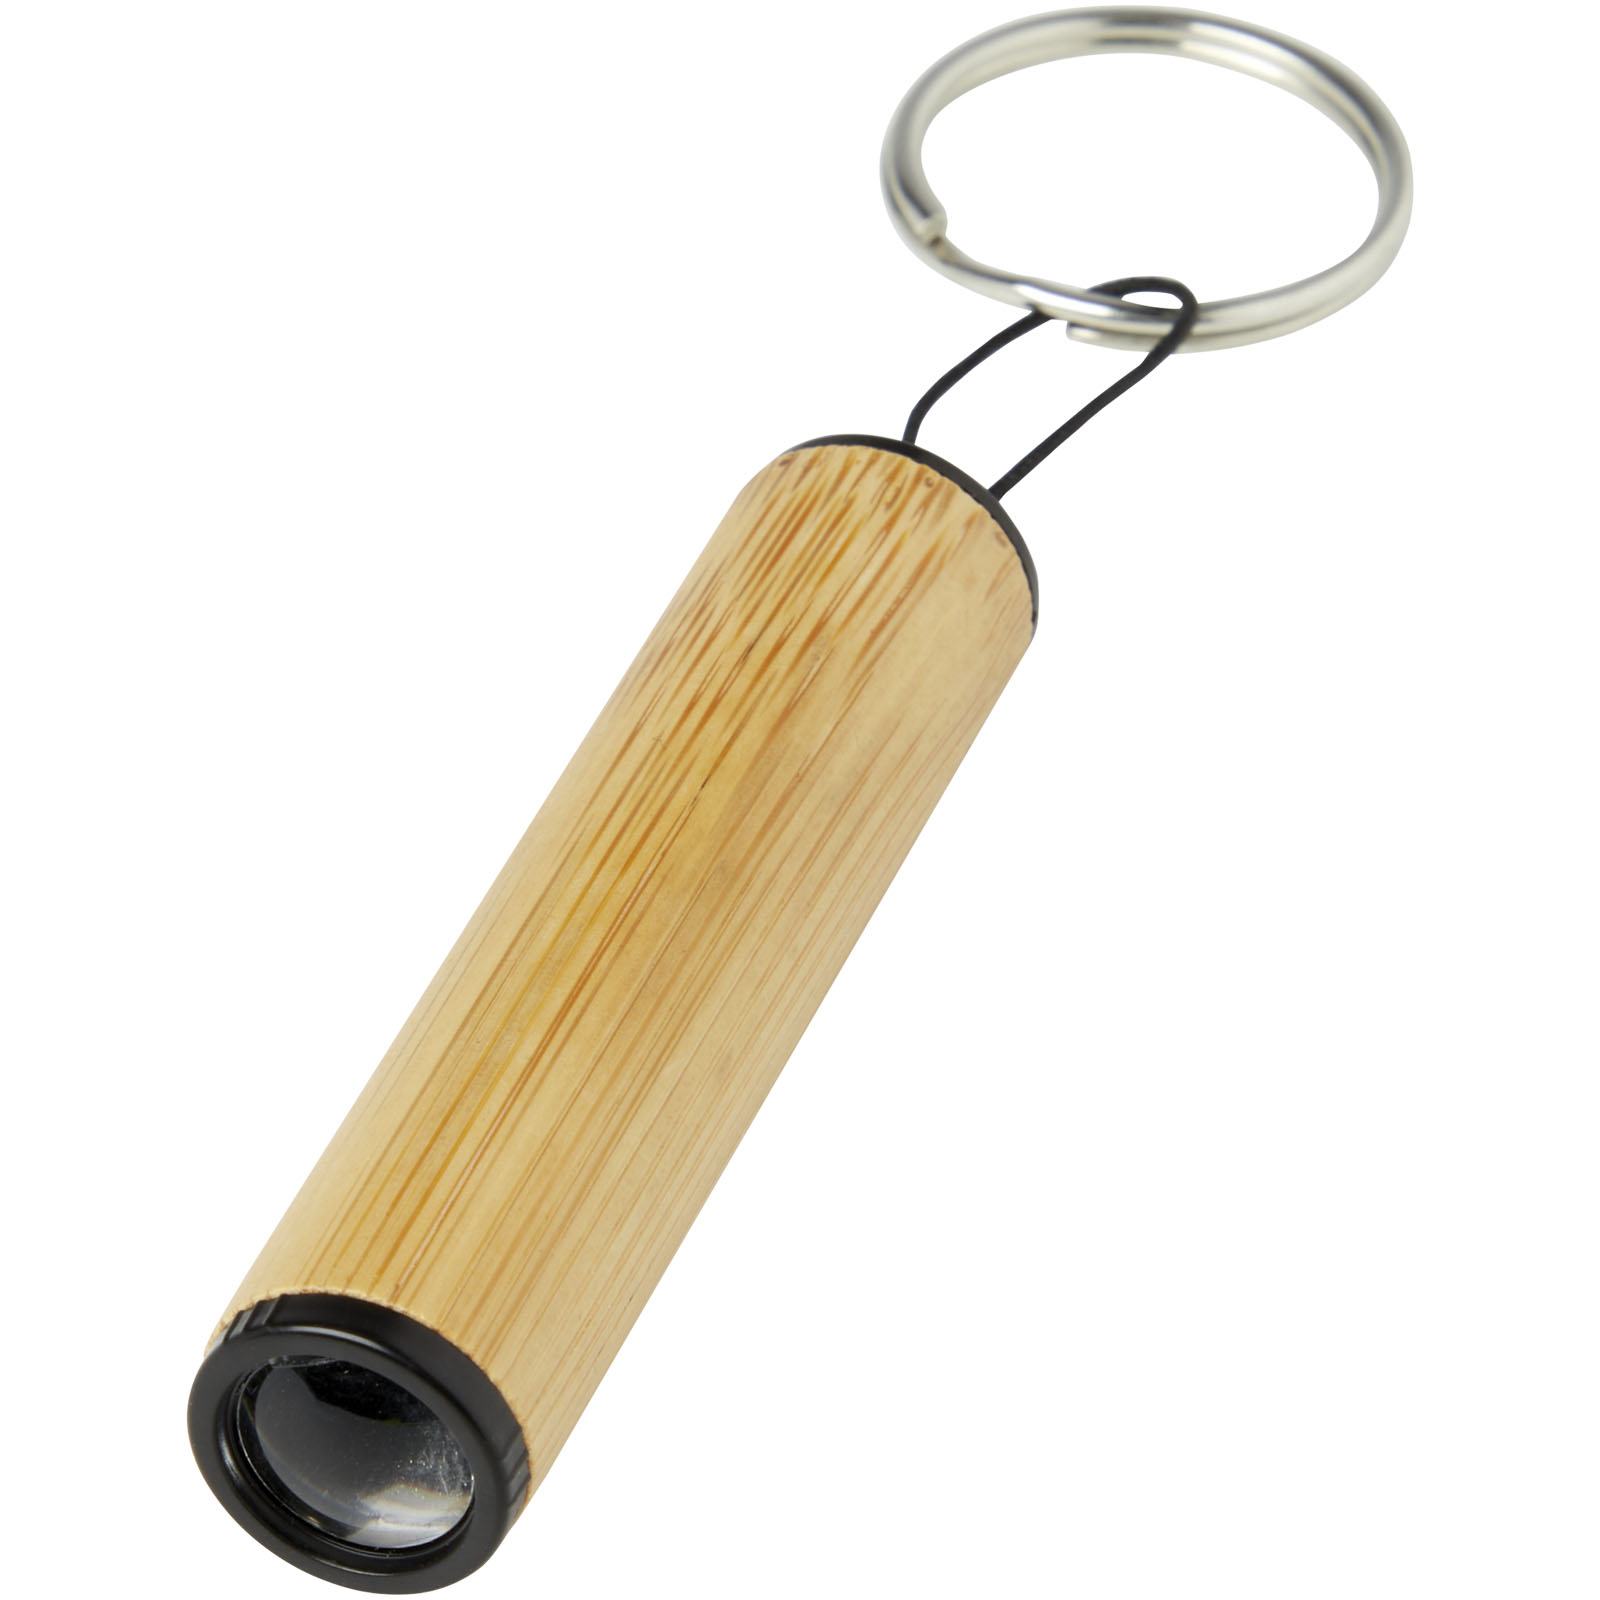 Advertising Lamps - Cane bamboo key ring with light